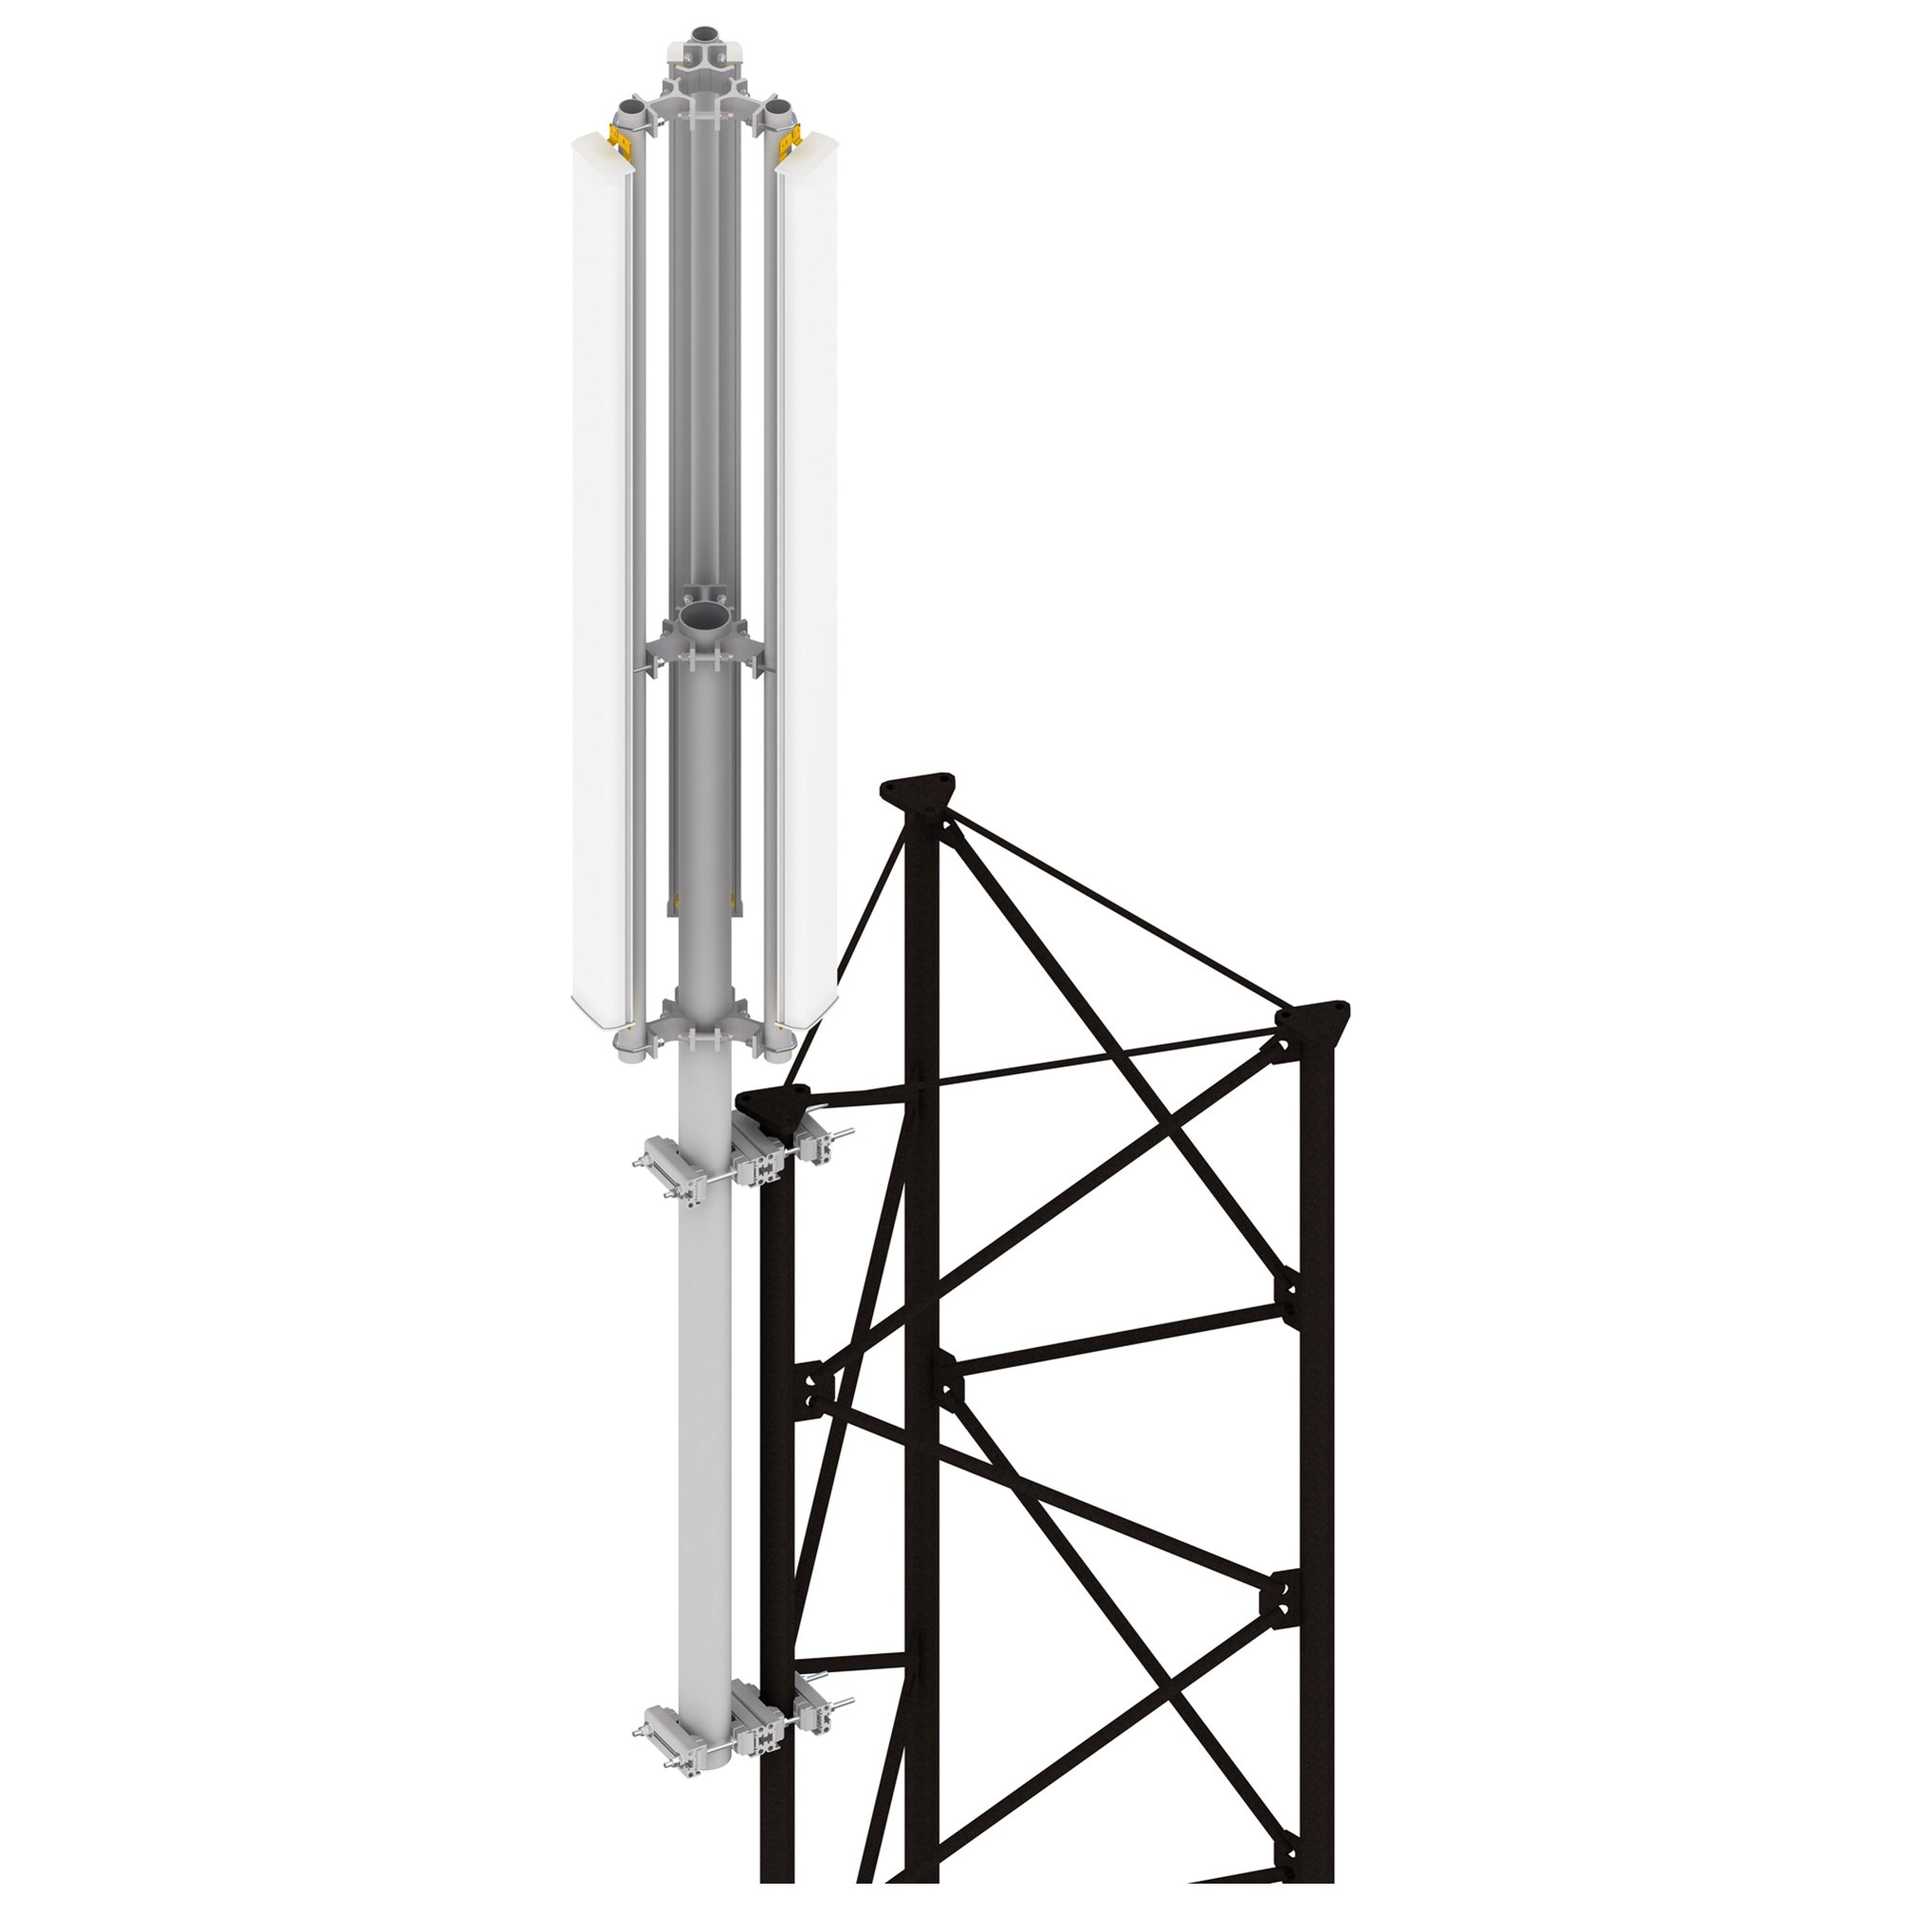 Top Spire Antenna Supports